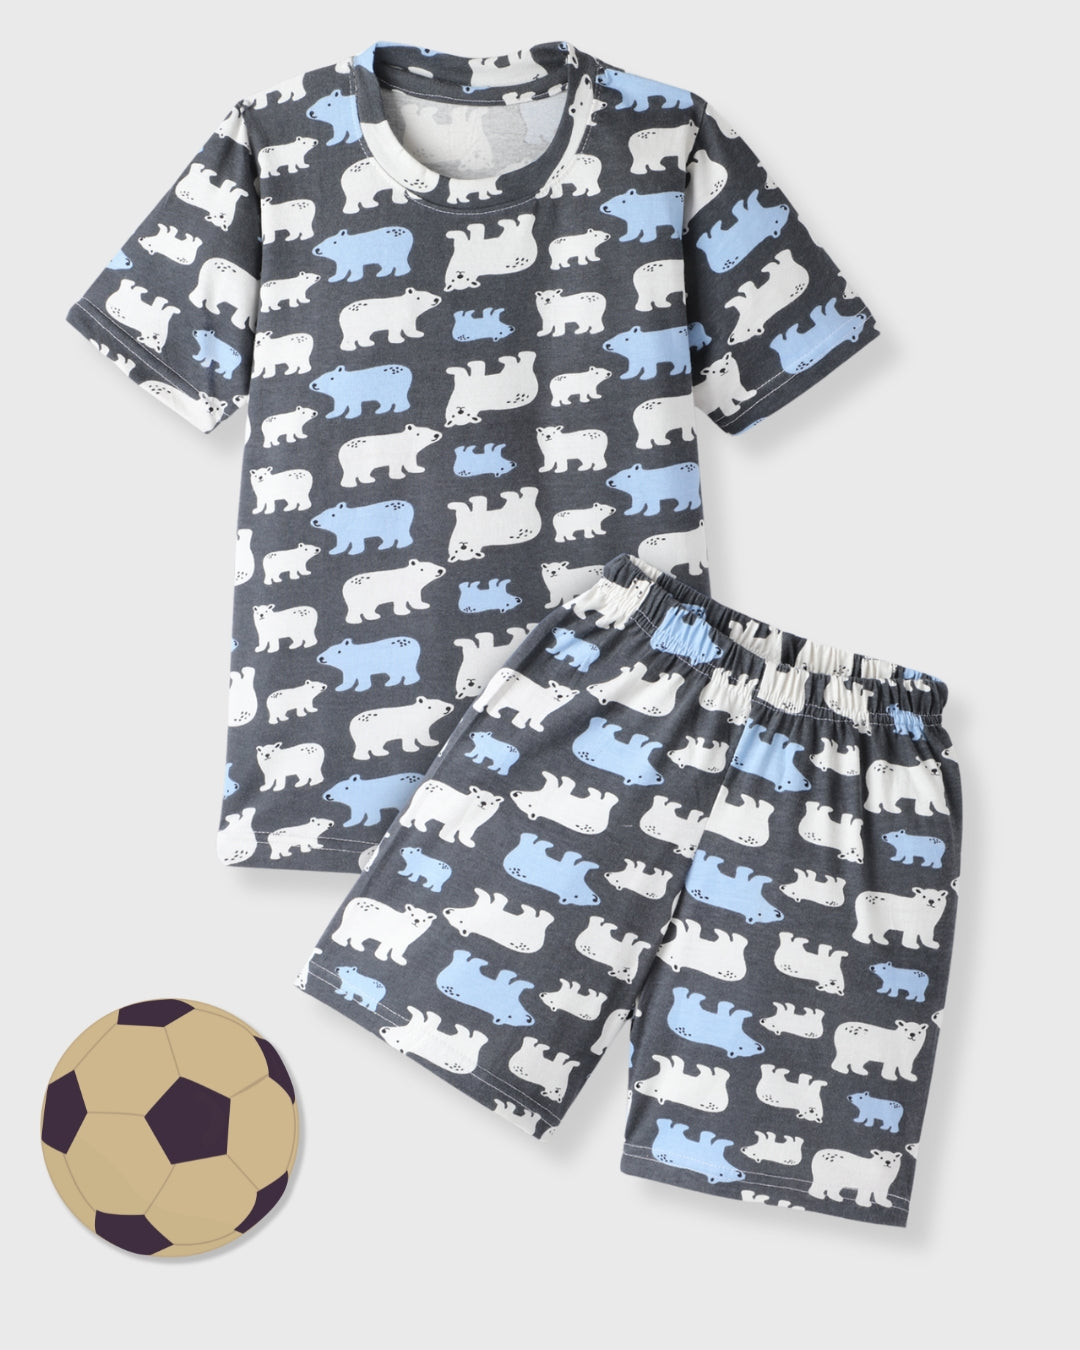 Blue & Grey Pure Cotton Half Sleeves Printed T-shirt & Shorts Set for Girls - Pack of 2